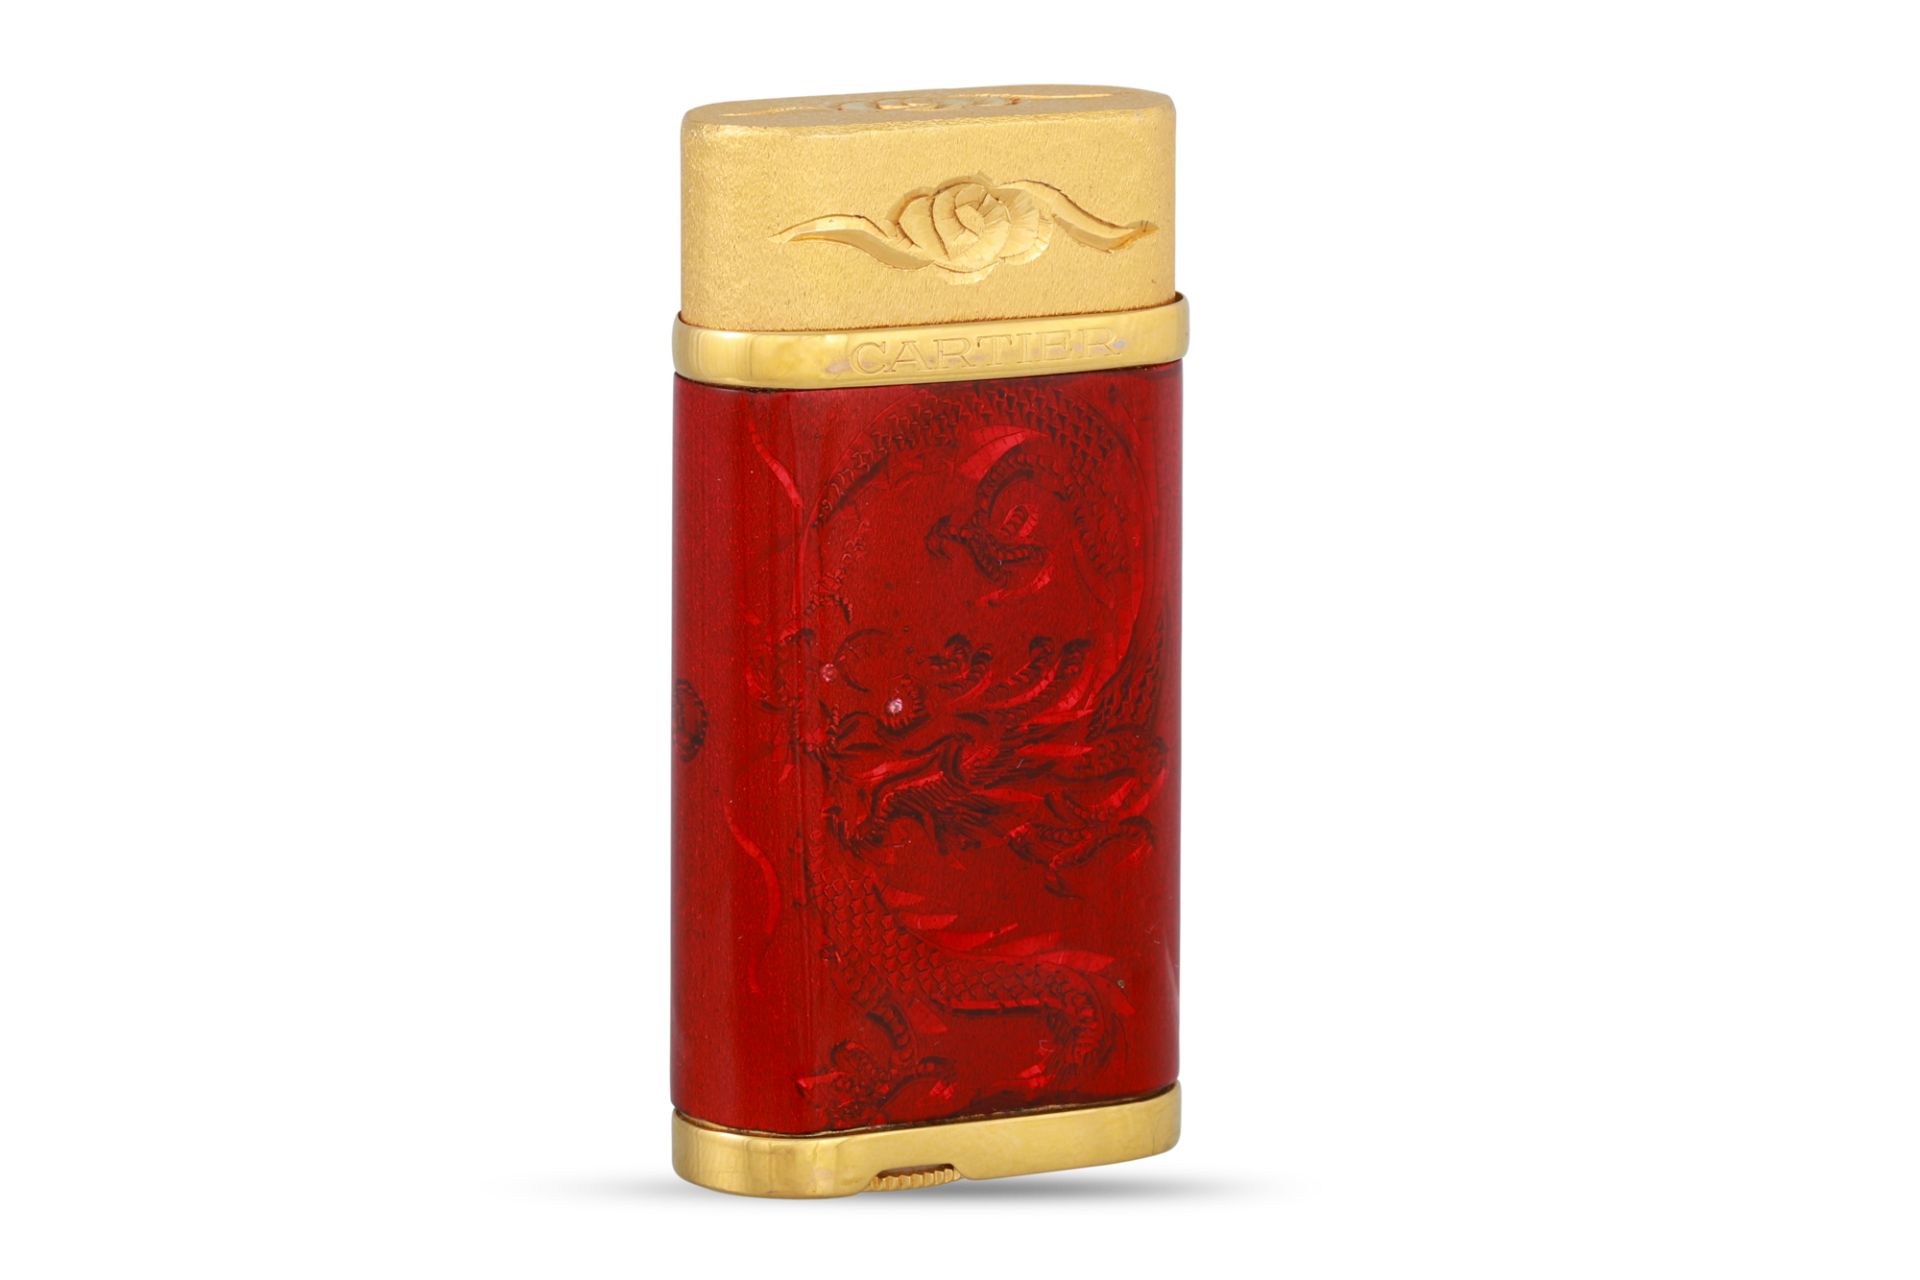 A CARTIER LIGHTER, gold-plated Ltd. edition, dragon decoration, purchased 1/8/2003, boxed, spare